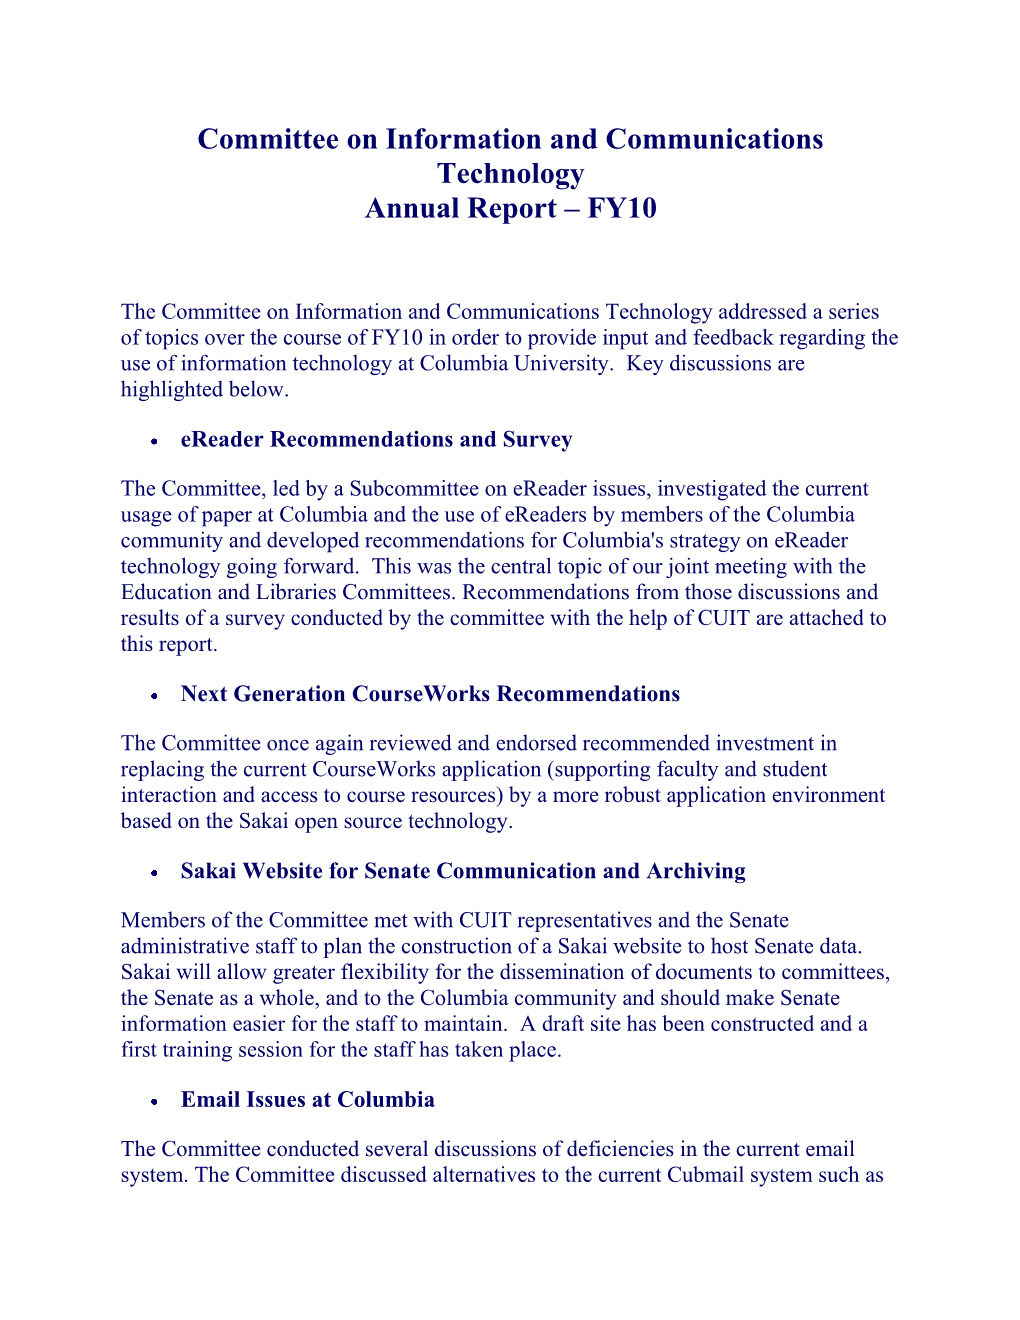 Committee on Information and Communications Technology Annual Report – FY10